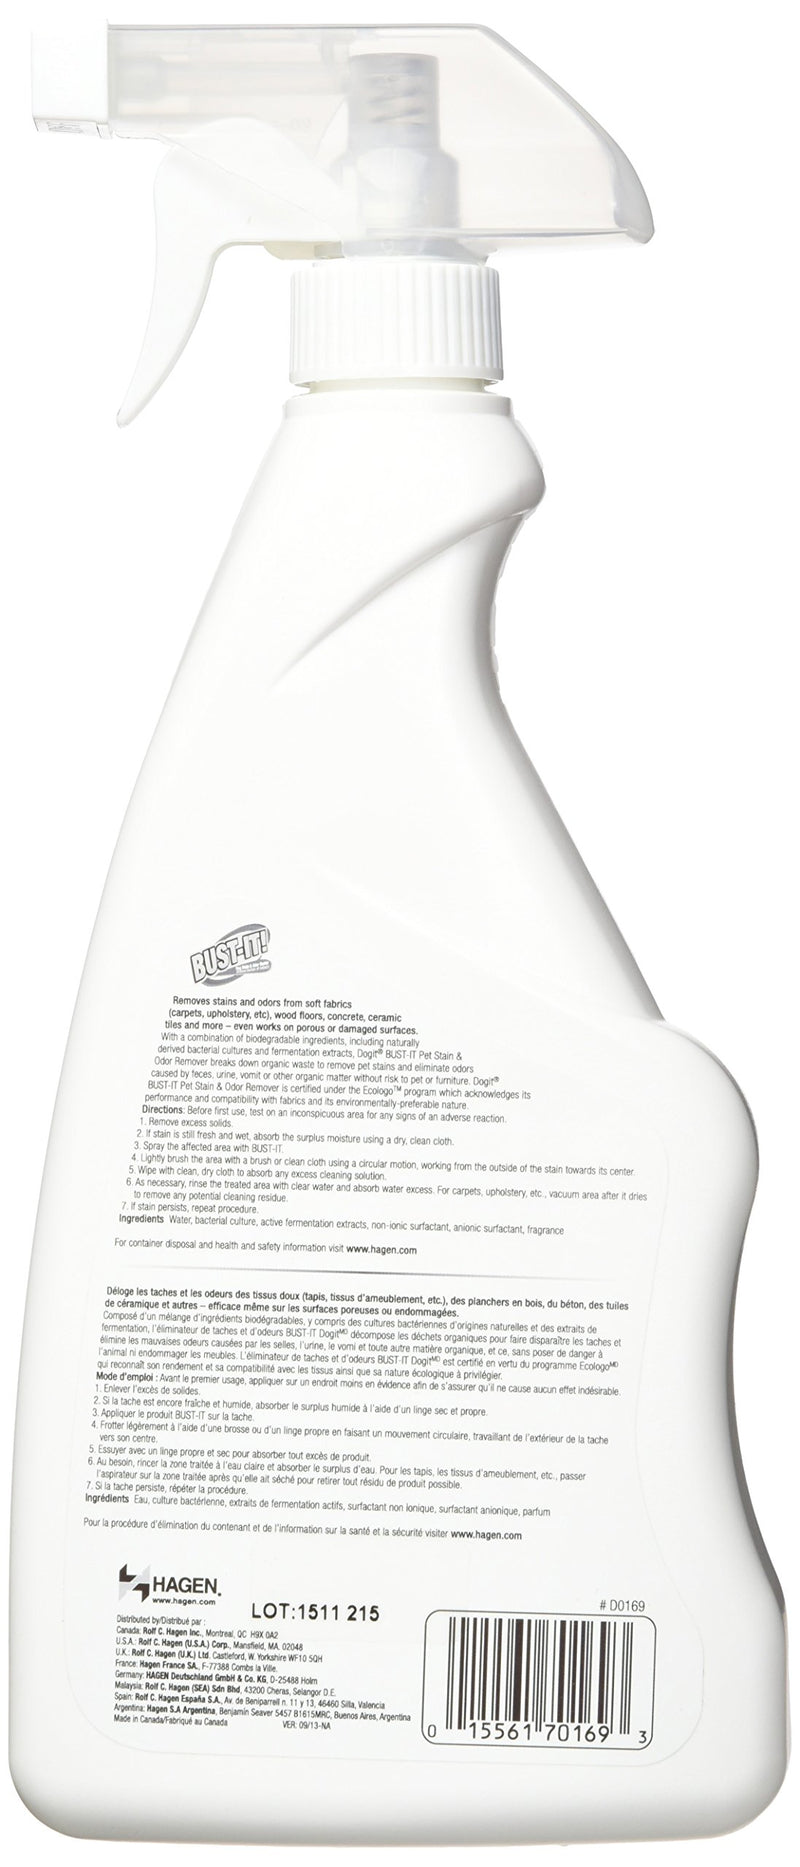 Dogit Bust It Pet Stain and Odour Buster for Any Stain/ Any Surface, 710 ml - PawsPlanet Australia